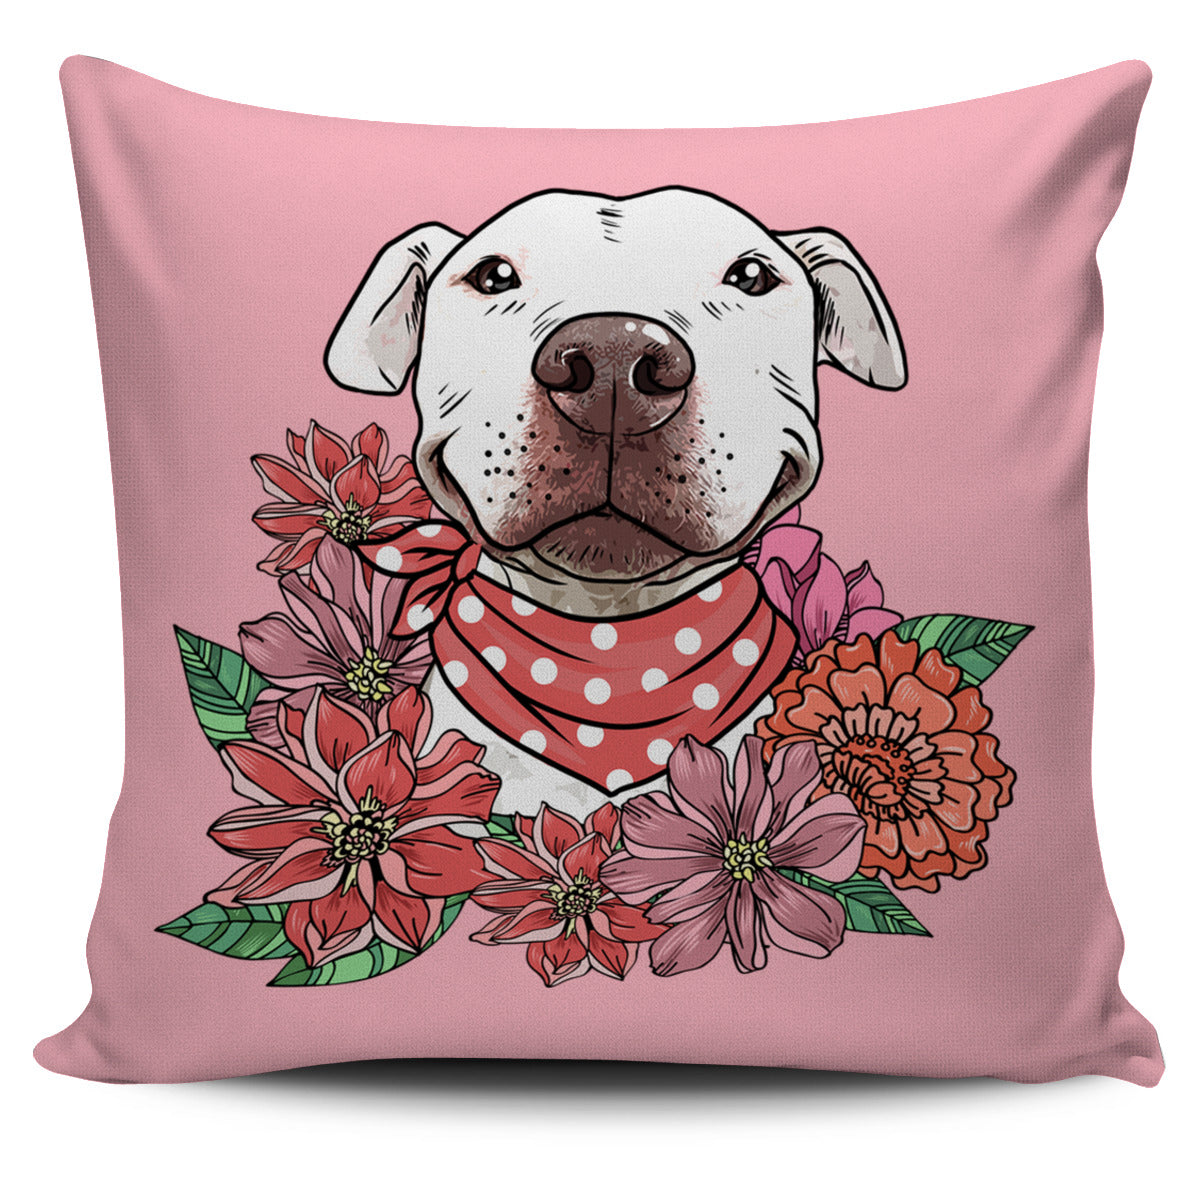 Illustrated Pit Bull Pillow Cover